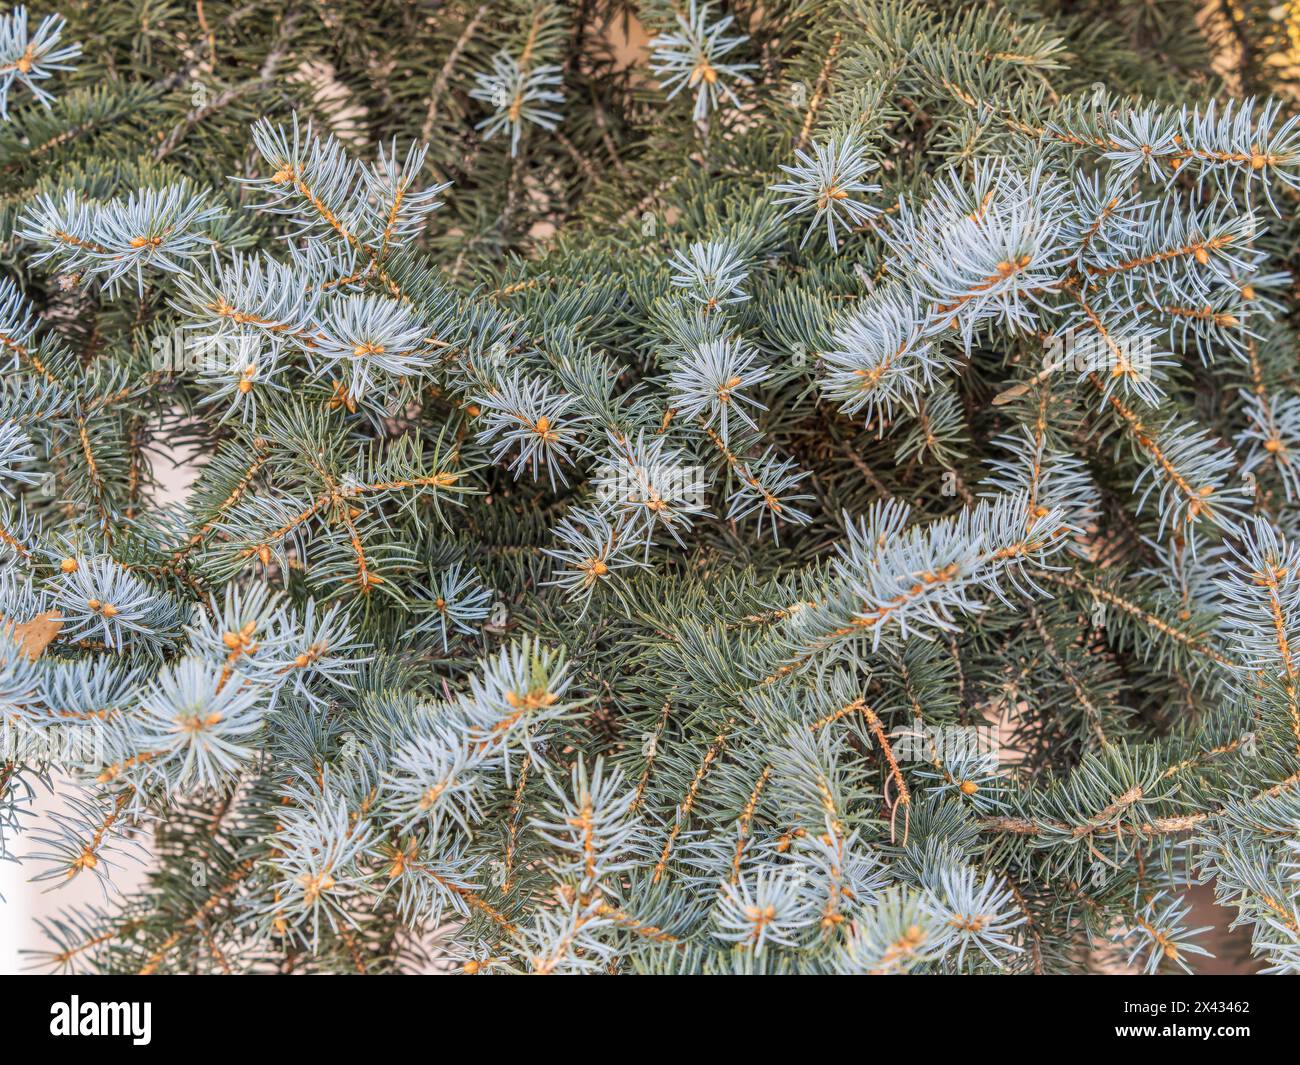 Branches of blue spruce with needles in the sunset light. Fir branch in the rays of the sun. The blue spruce, Colorado spruce, or Colorado blue spruce Stock Photo